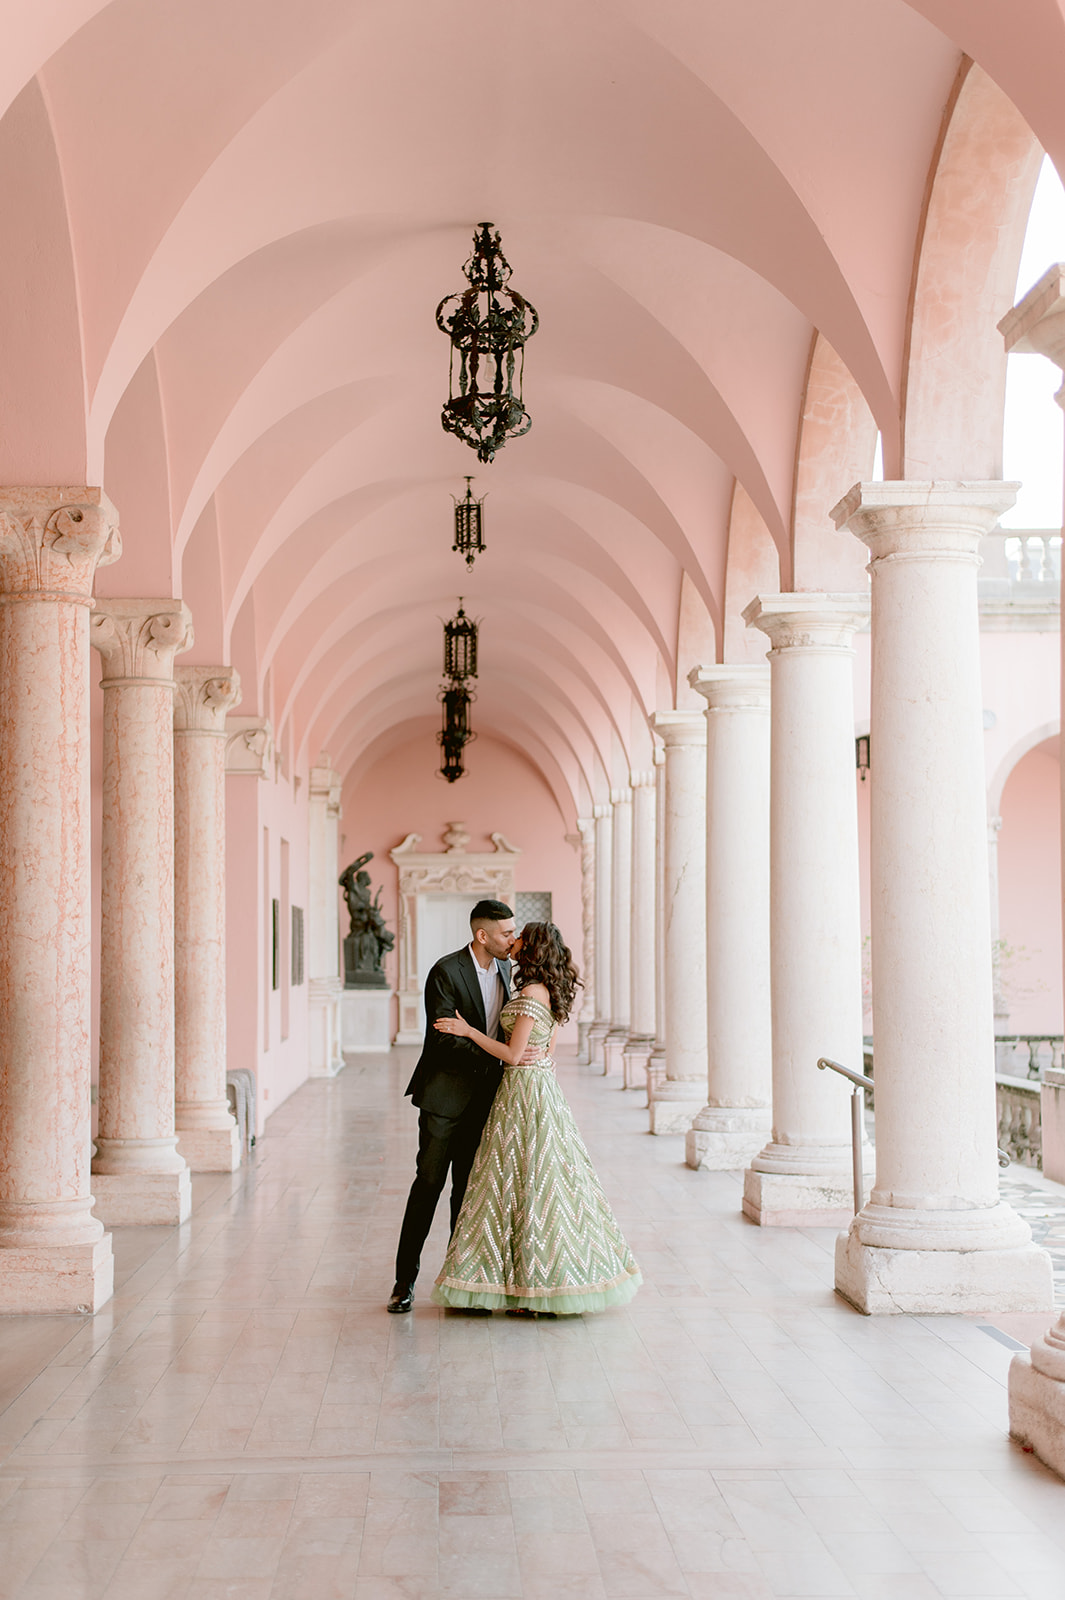 "Indian engagement session with the Ringling Museum's Ca' d'Zan as a stunning backdrop"
